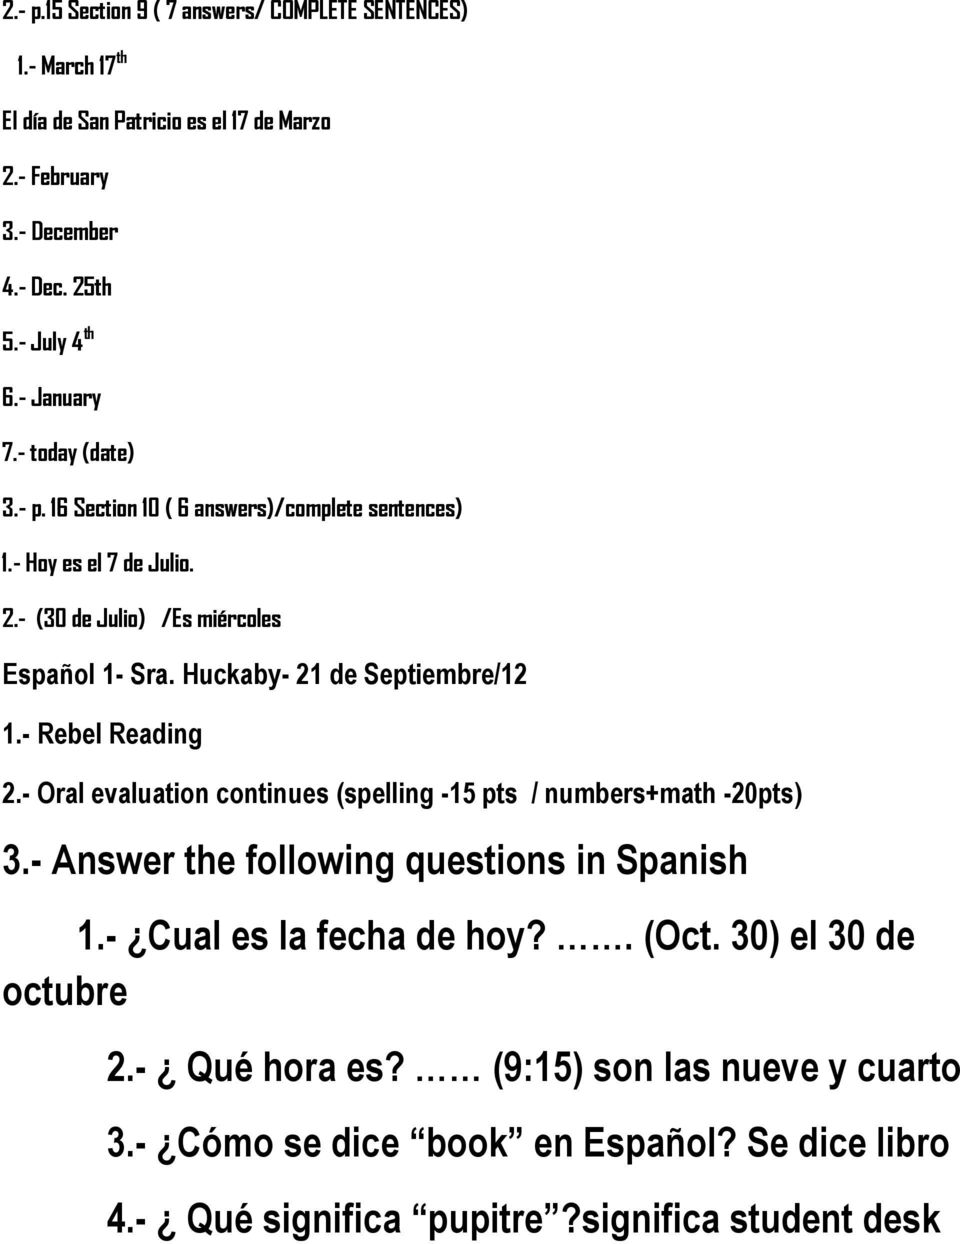 Huckaby- 21 de Septiembre/12 1.- Rebel Reading 2.- Oral evaluation continues (spelling -15 pts / numbers+math -20pts) 3.- Answer the following questions in Spanish 1.